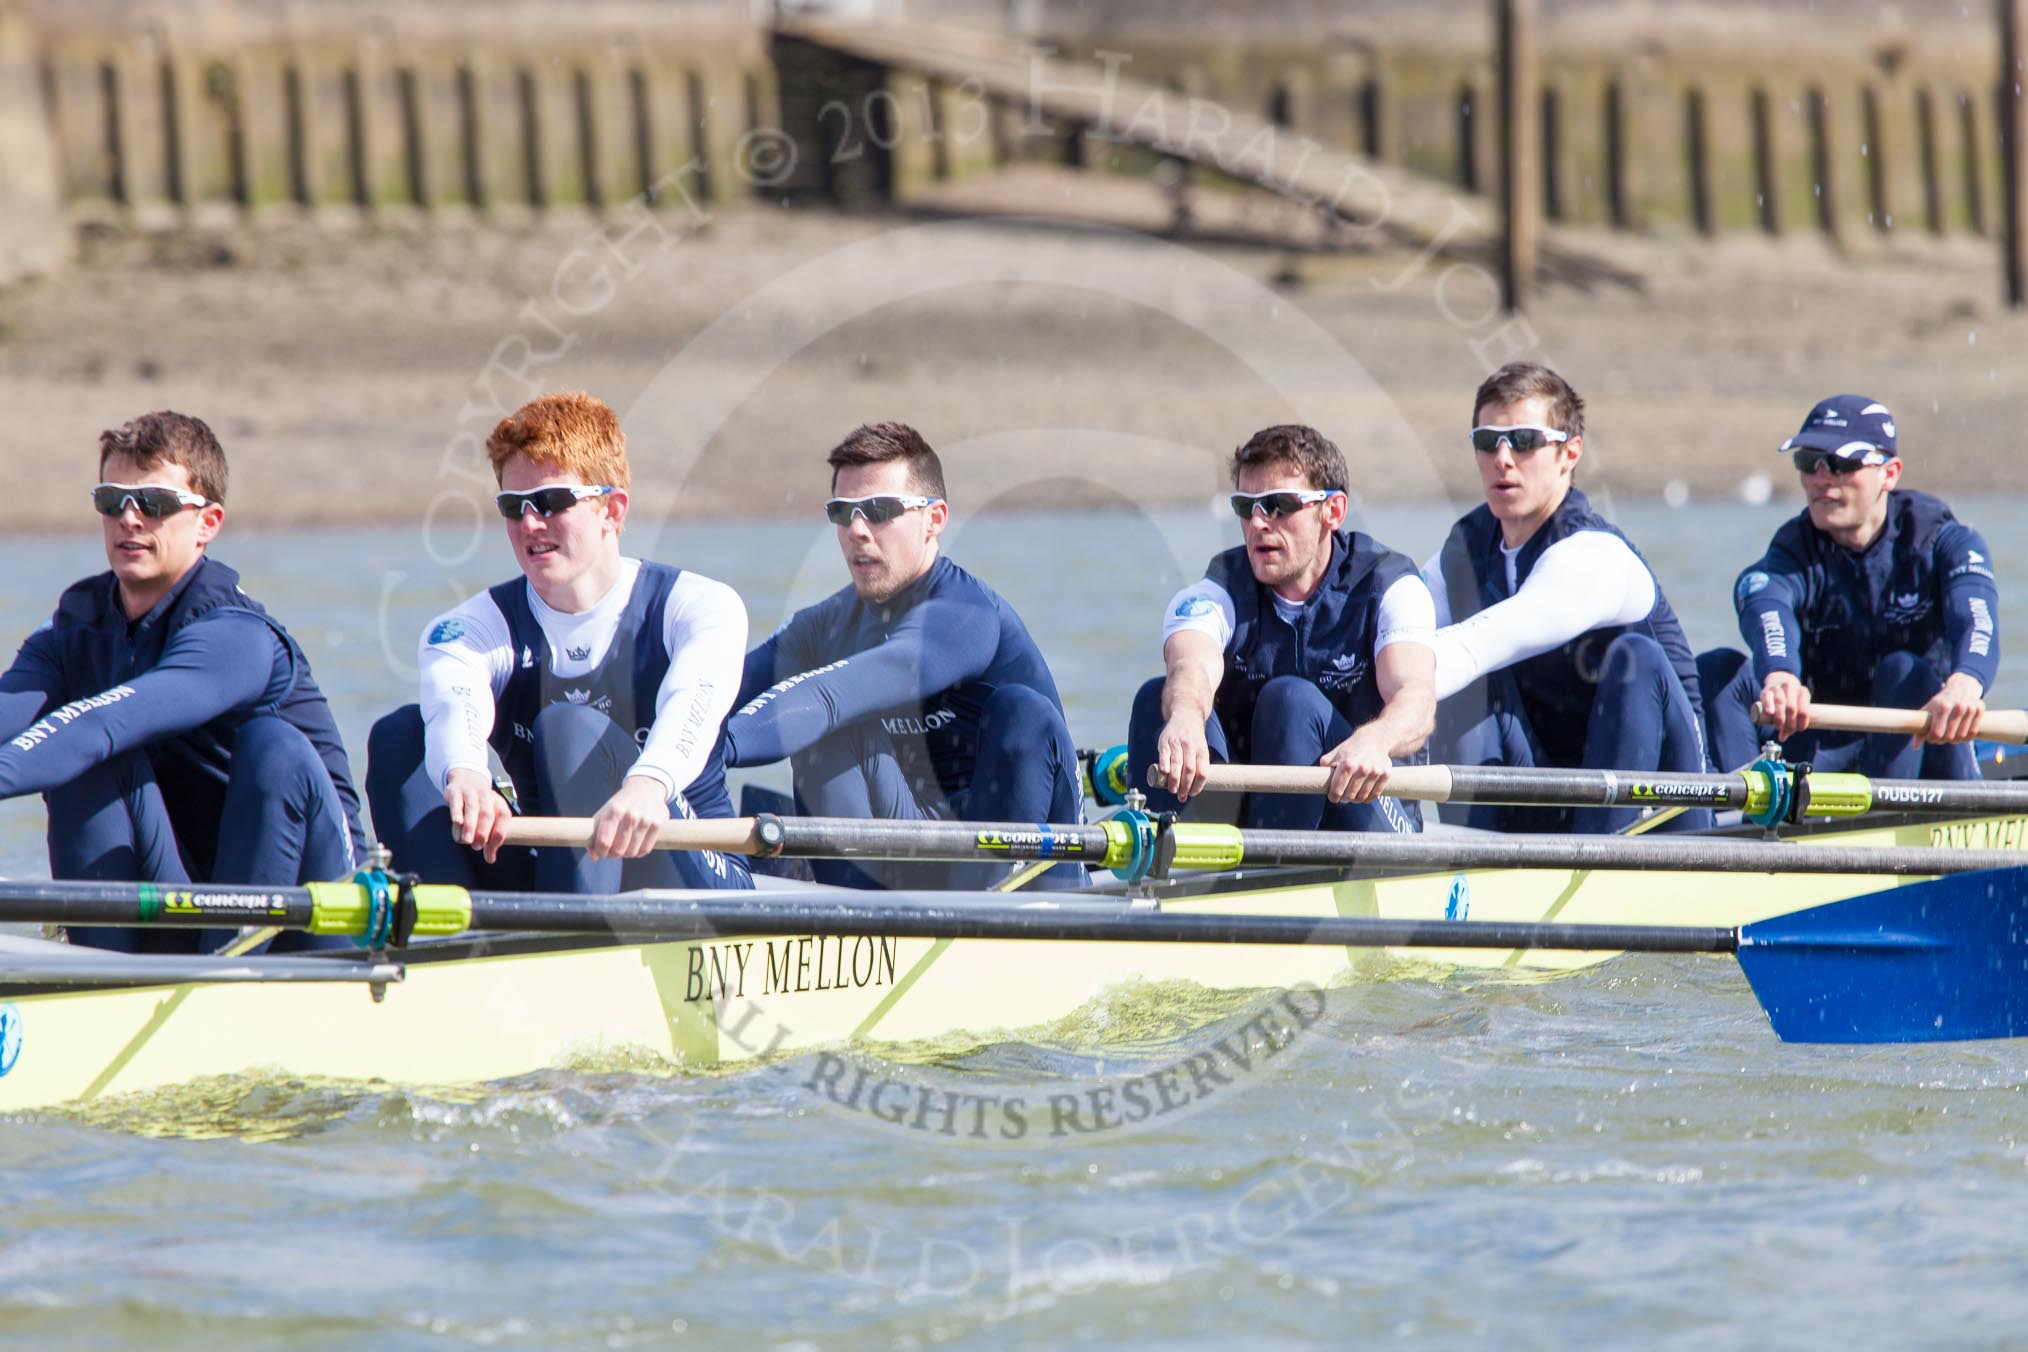 The Boat Race season 2013 -  Tideway Week (Friday) and press conferences.
River Thames,
London SW15,

United Kingdom,
on 29 March 2013 at 11:09, image #74